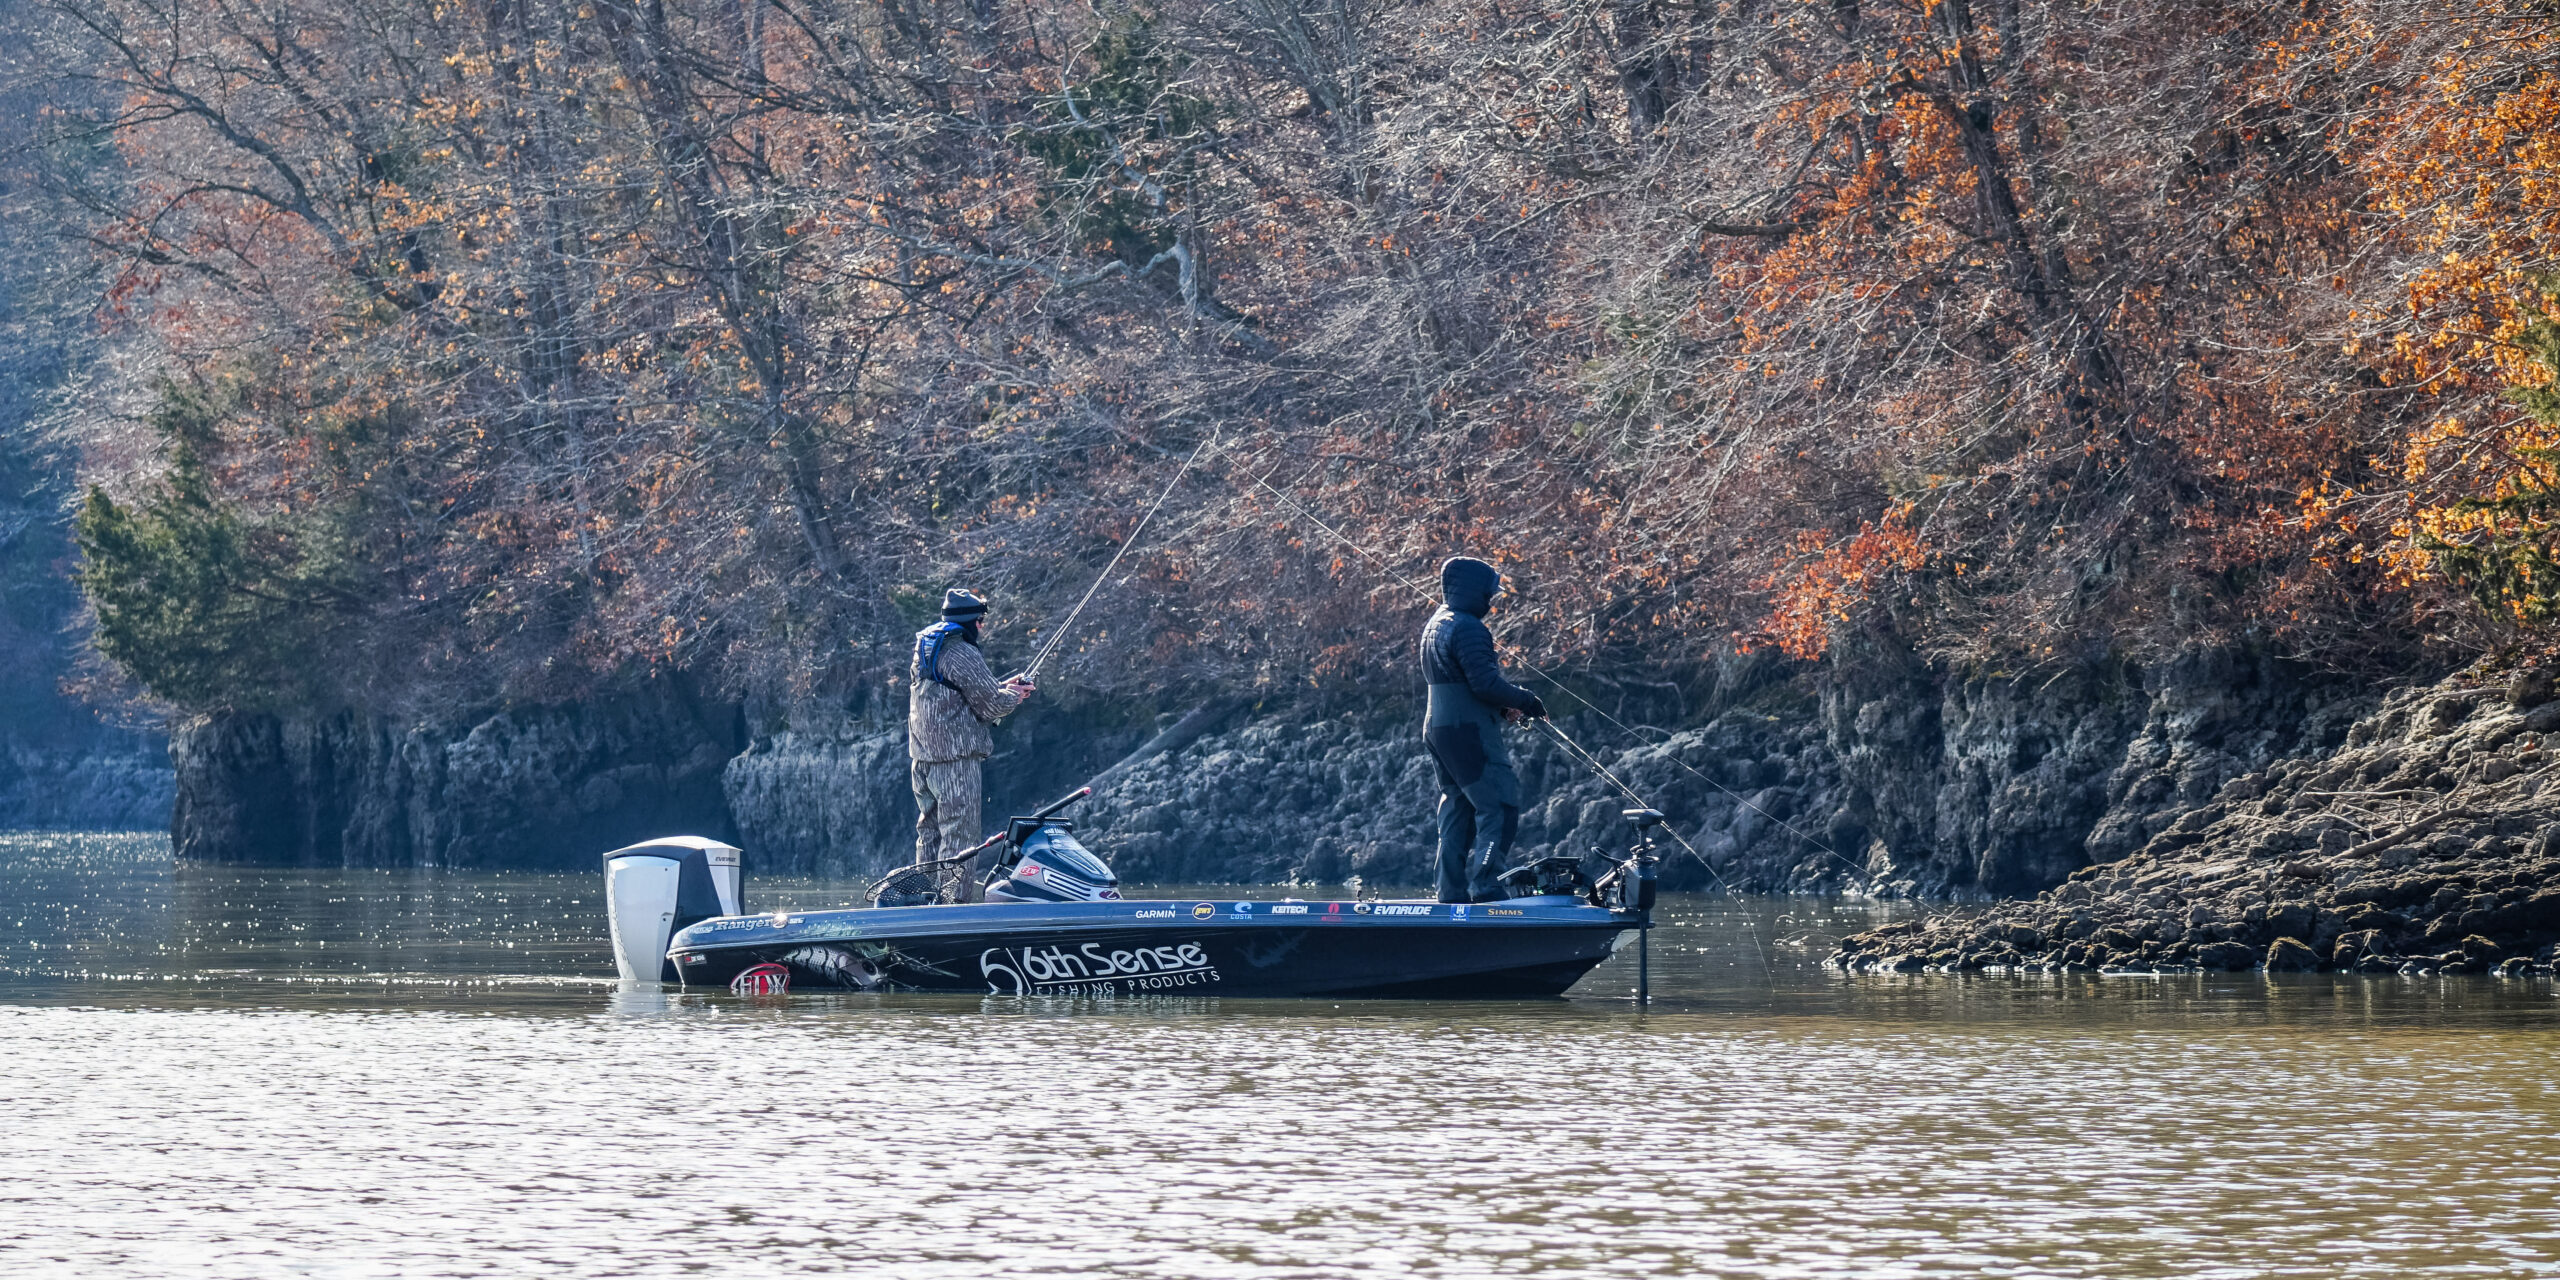 Top 10 Patterns and Baits from Lake of the Ozarks - Major League Fishing